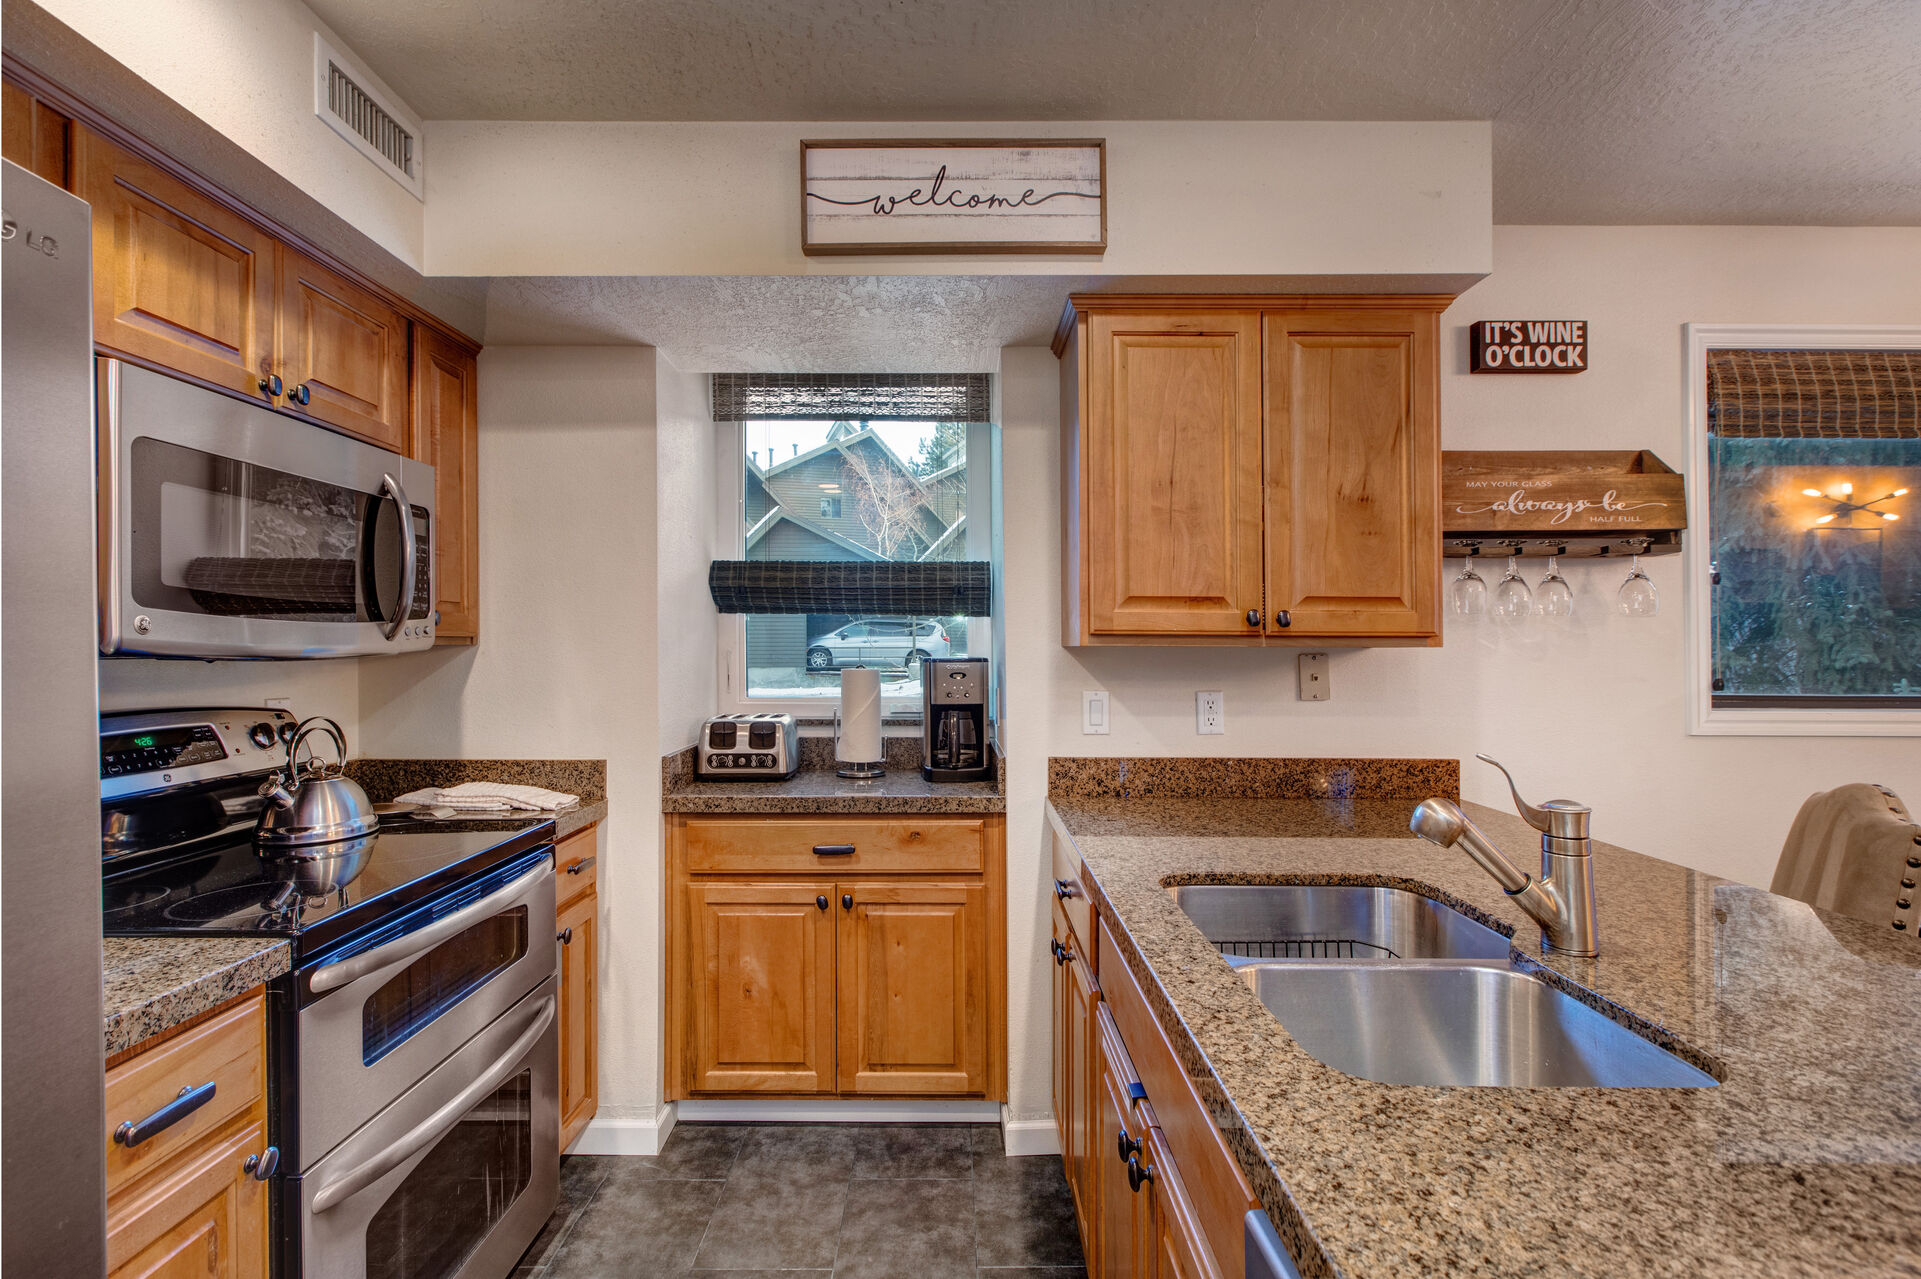 Fully Equipped Kitchen with stone countertops, stainless steel appliances, double oven, and bar seating for three